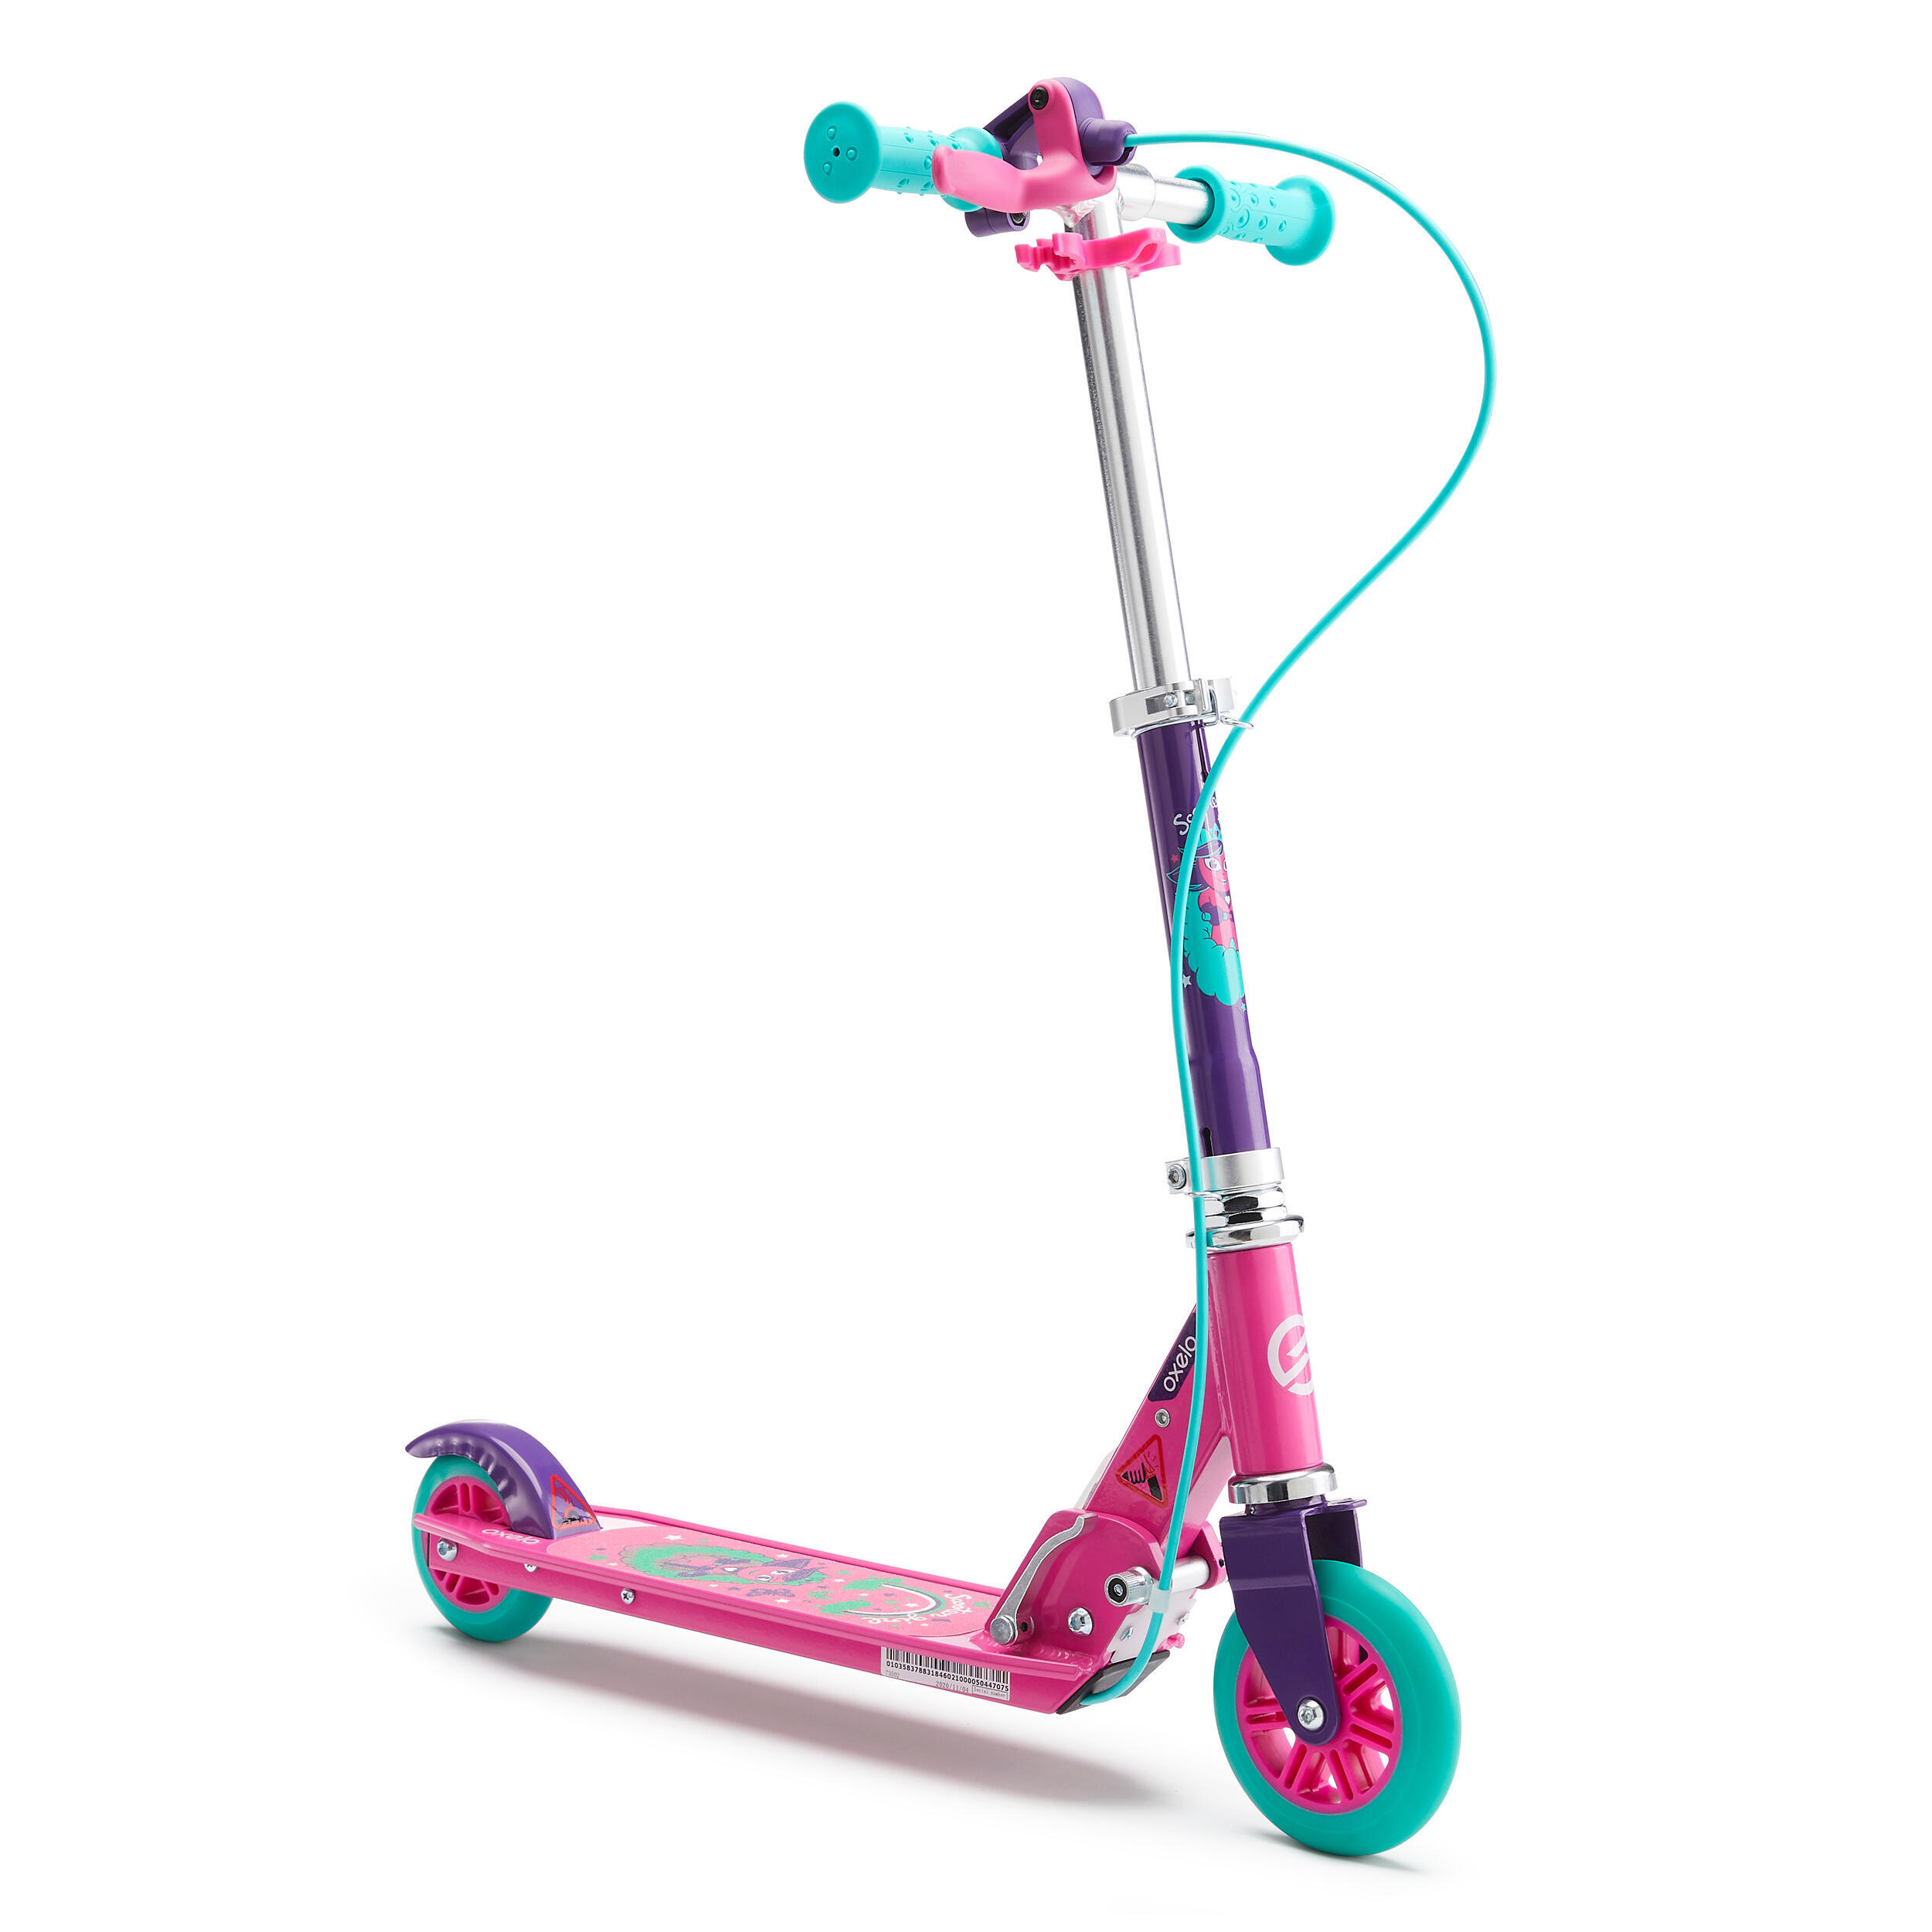 Play 5 Children's Scooter with Brake - Purple 1/9